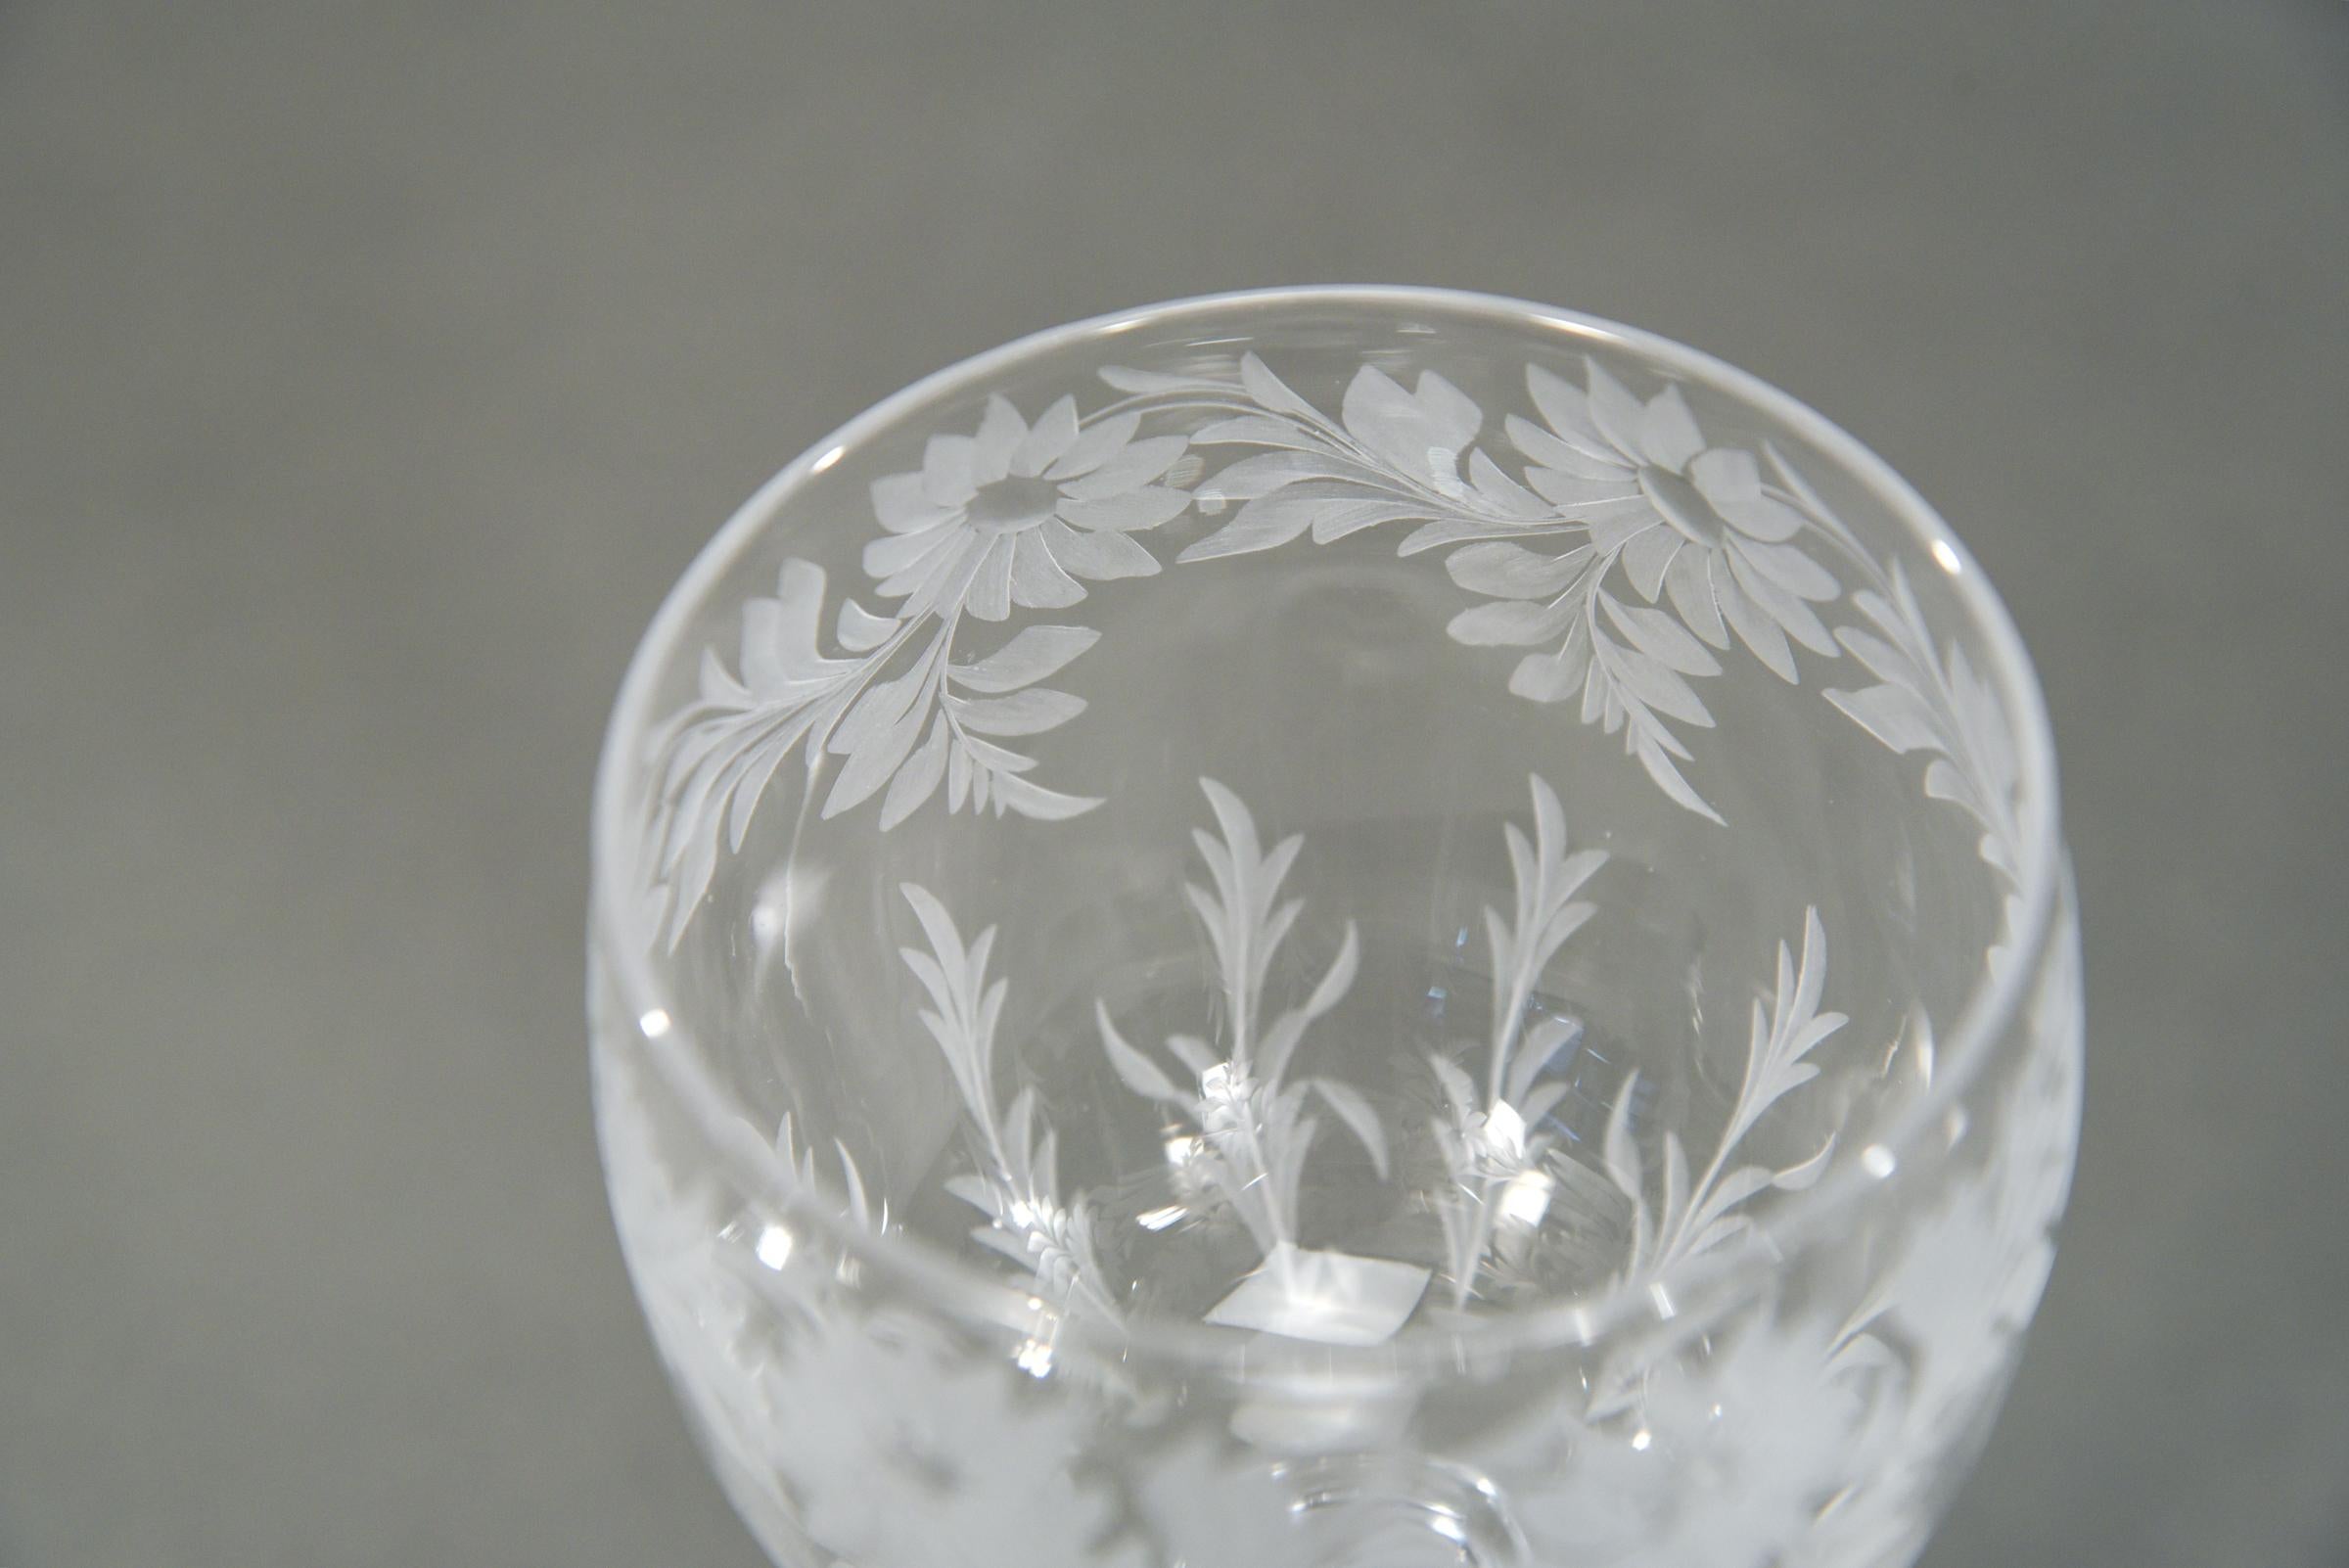 Engraved 12 Hand Blown Signed Libbey Wheel Cut Crystal Goblets Arts & Crafts Floral Motif